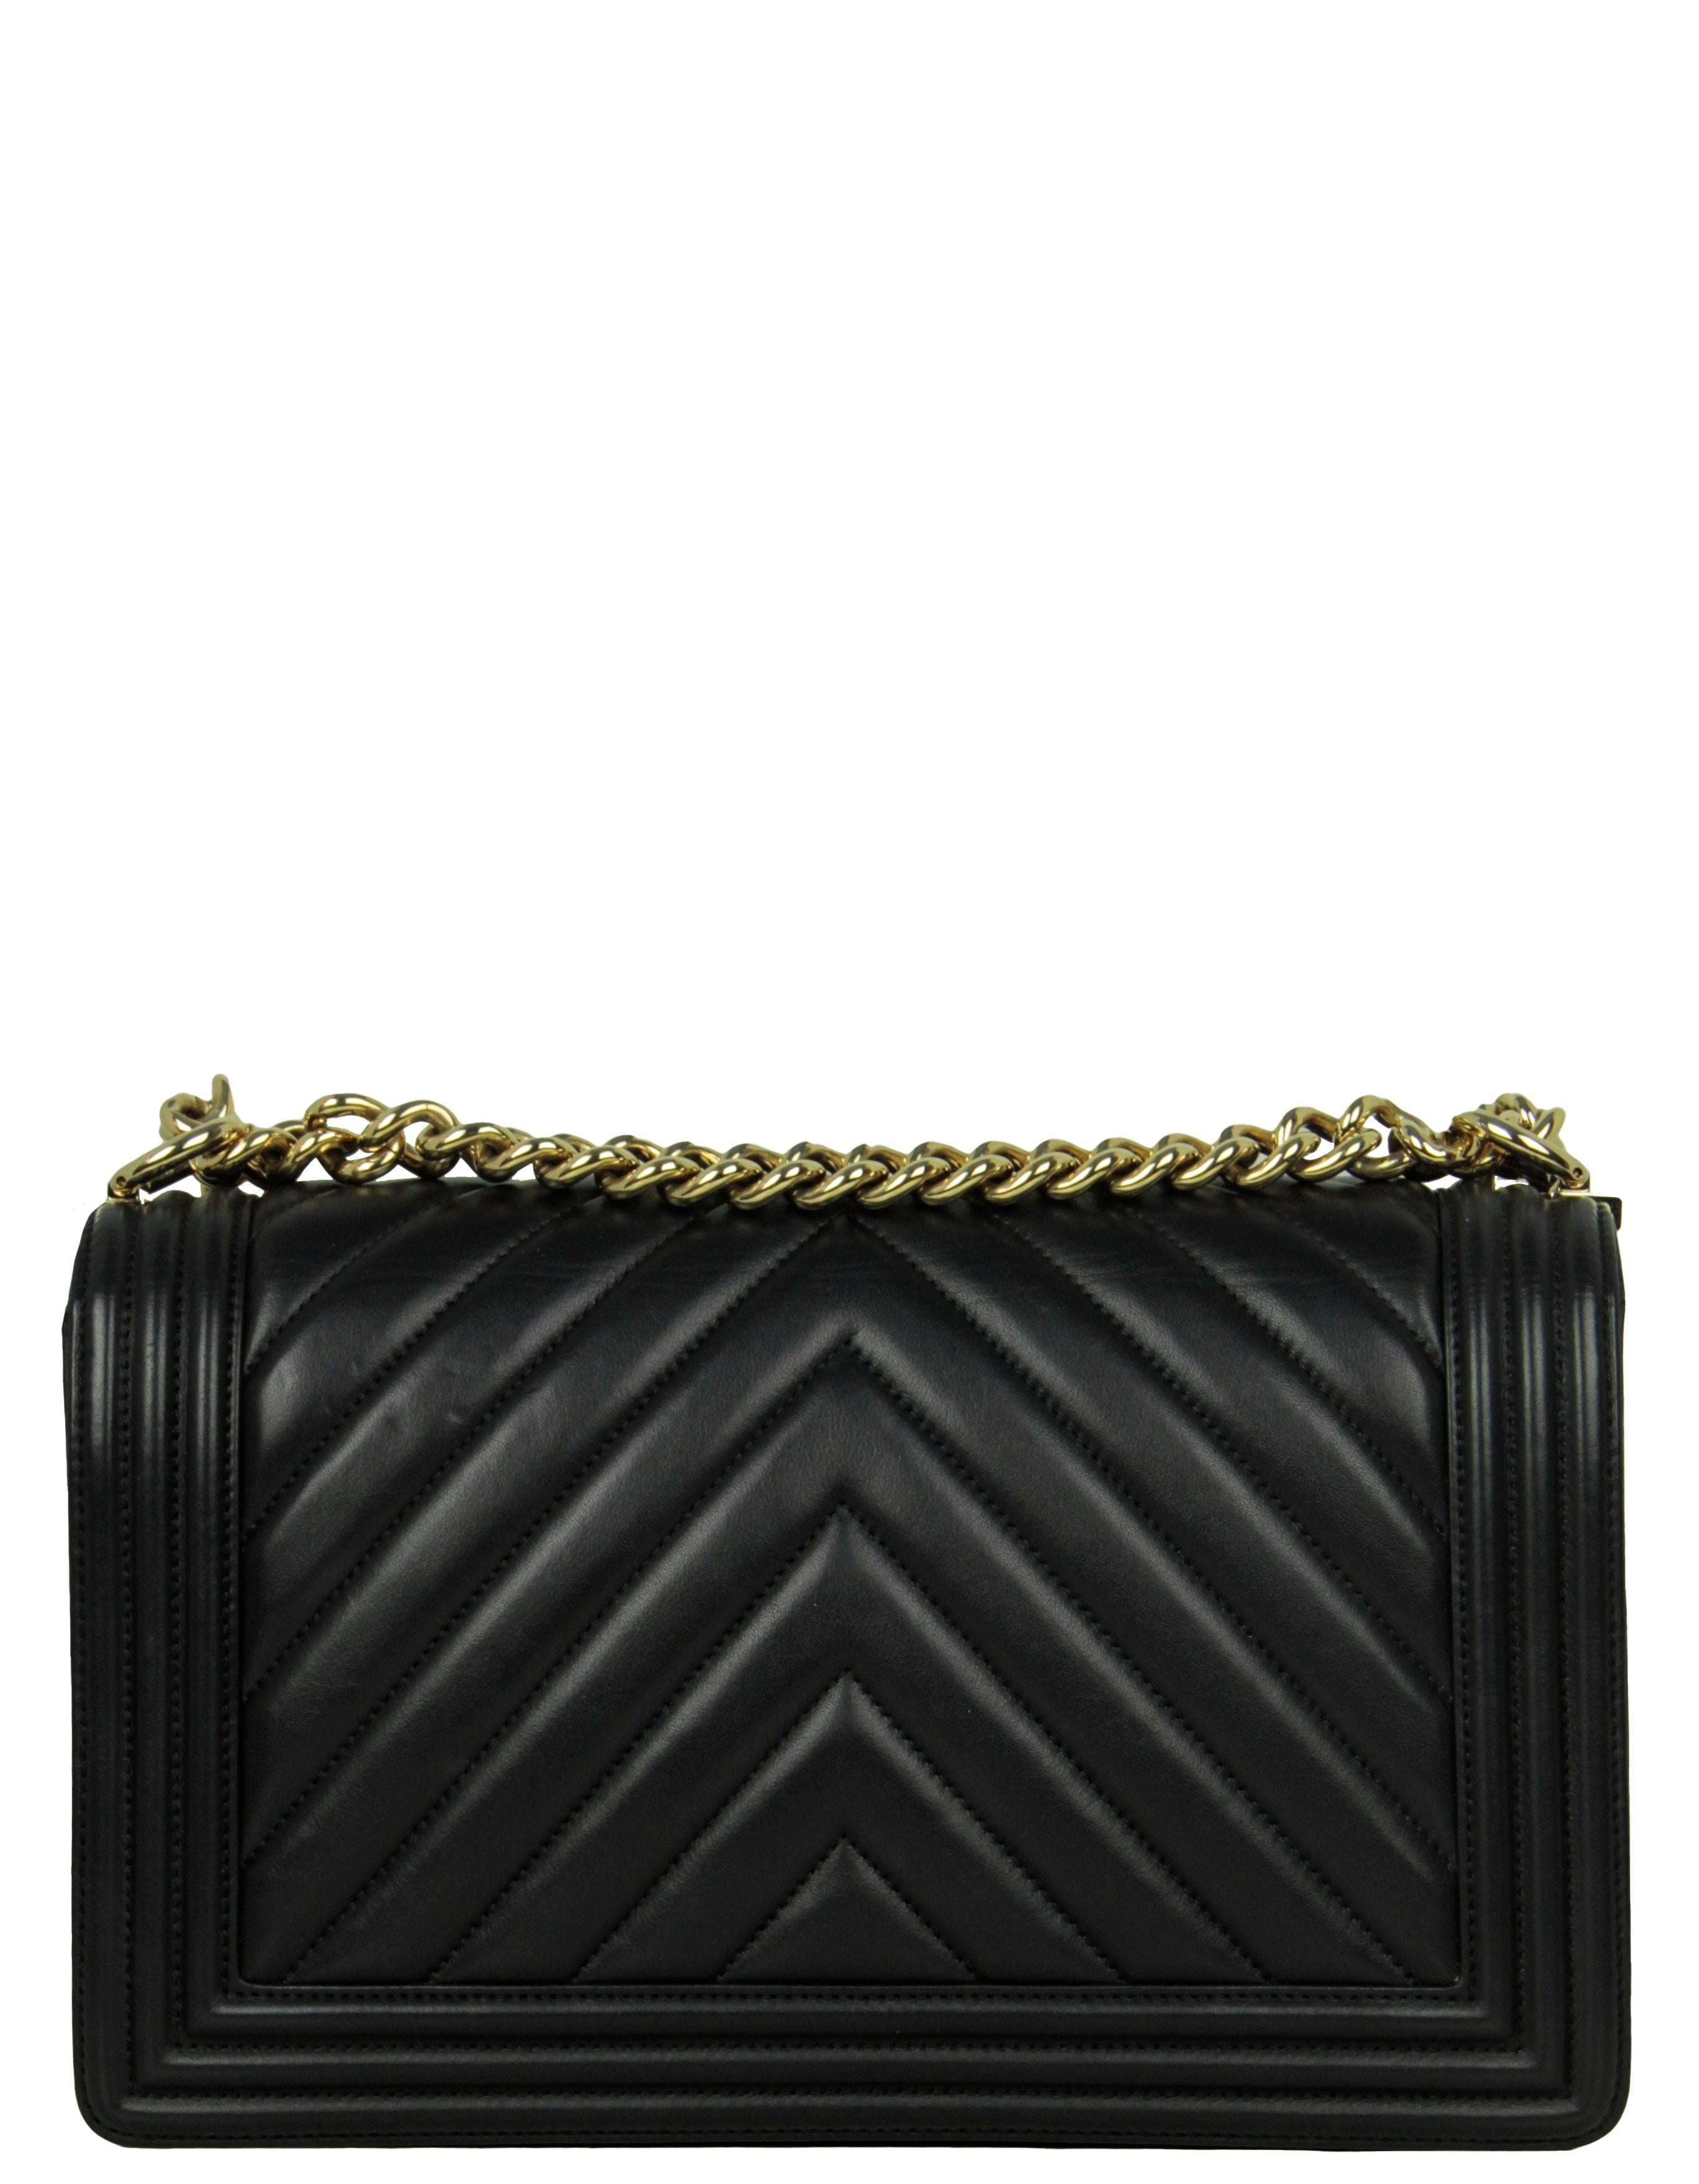 Chanel Black Chevron Lambskin Leather New Medium Boy Bag In Excellent Condition For Sale In New York, NY